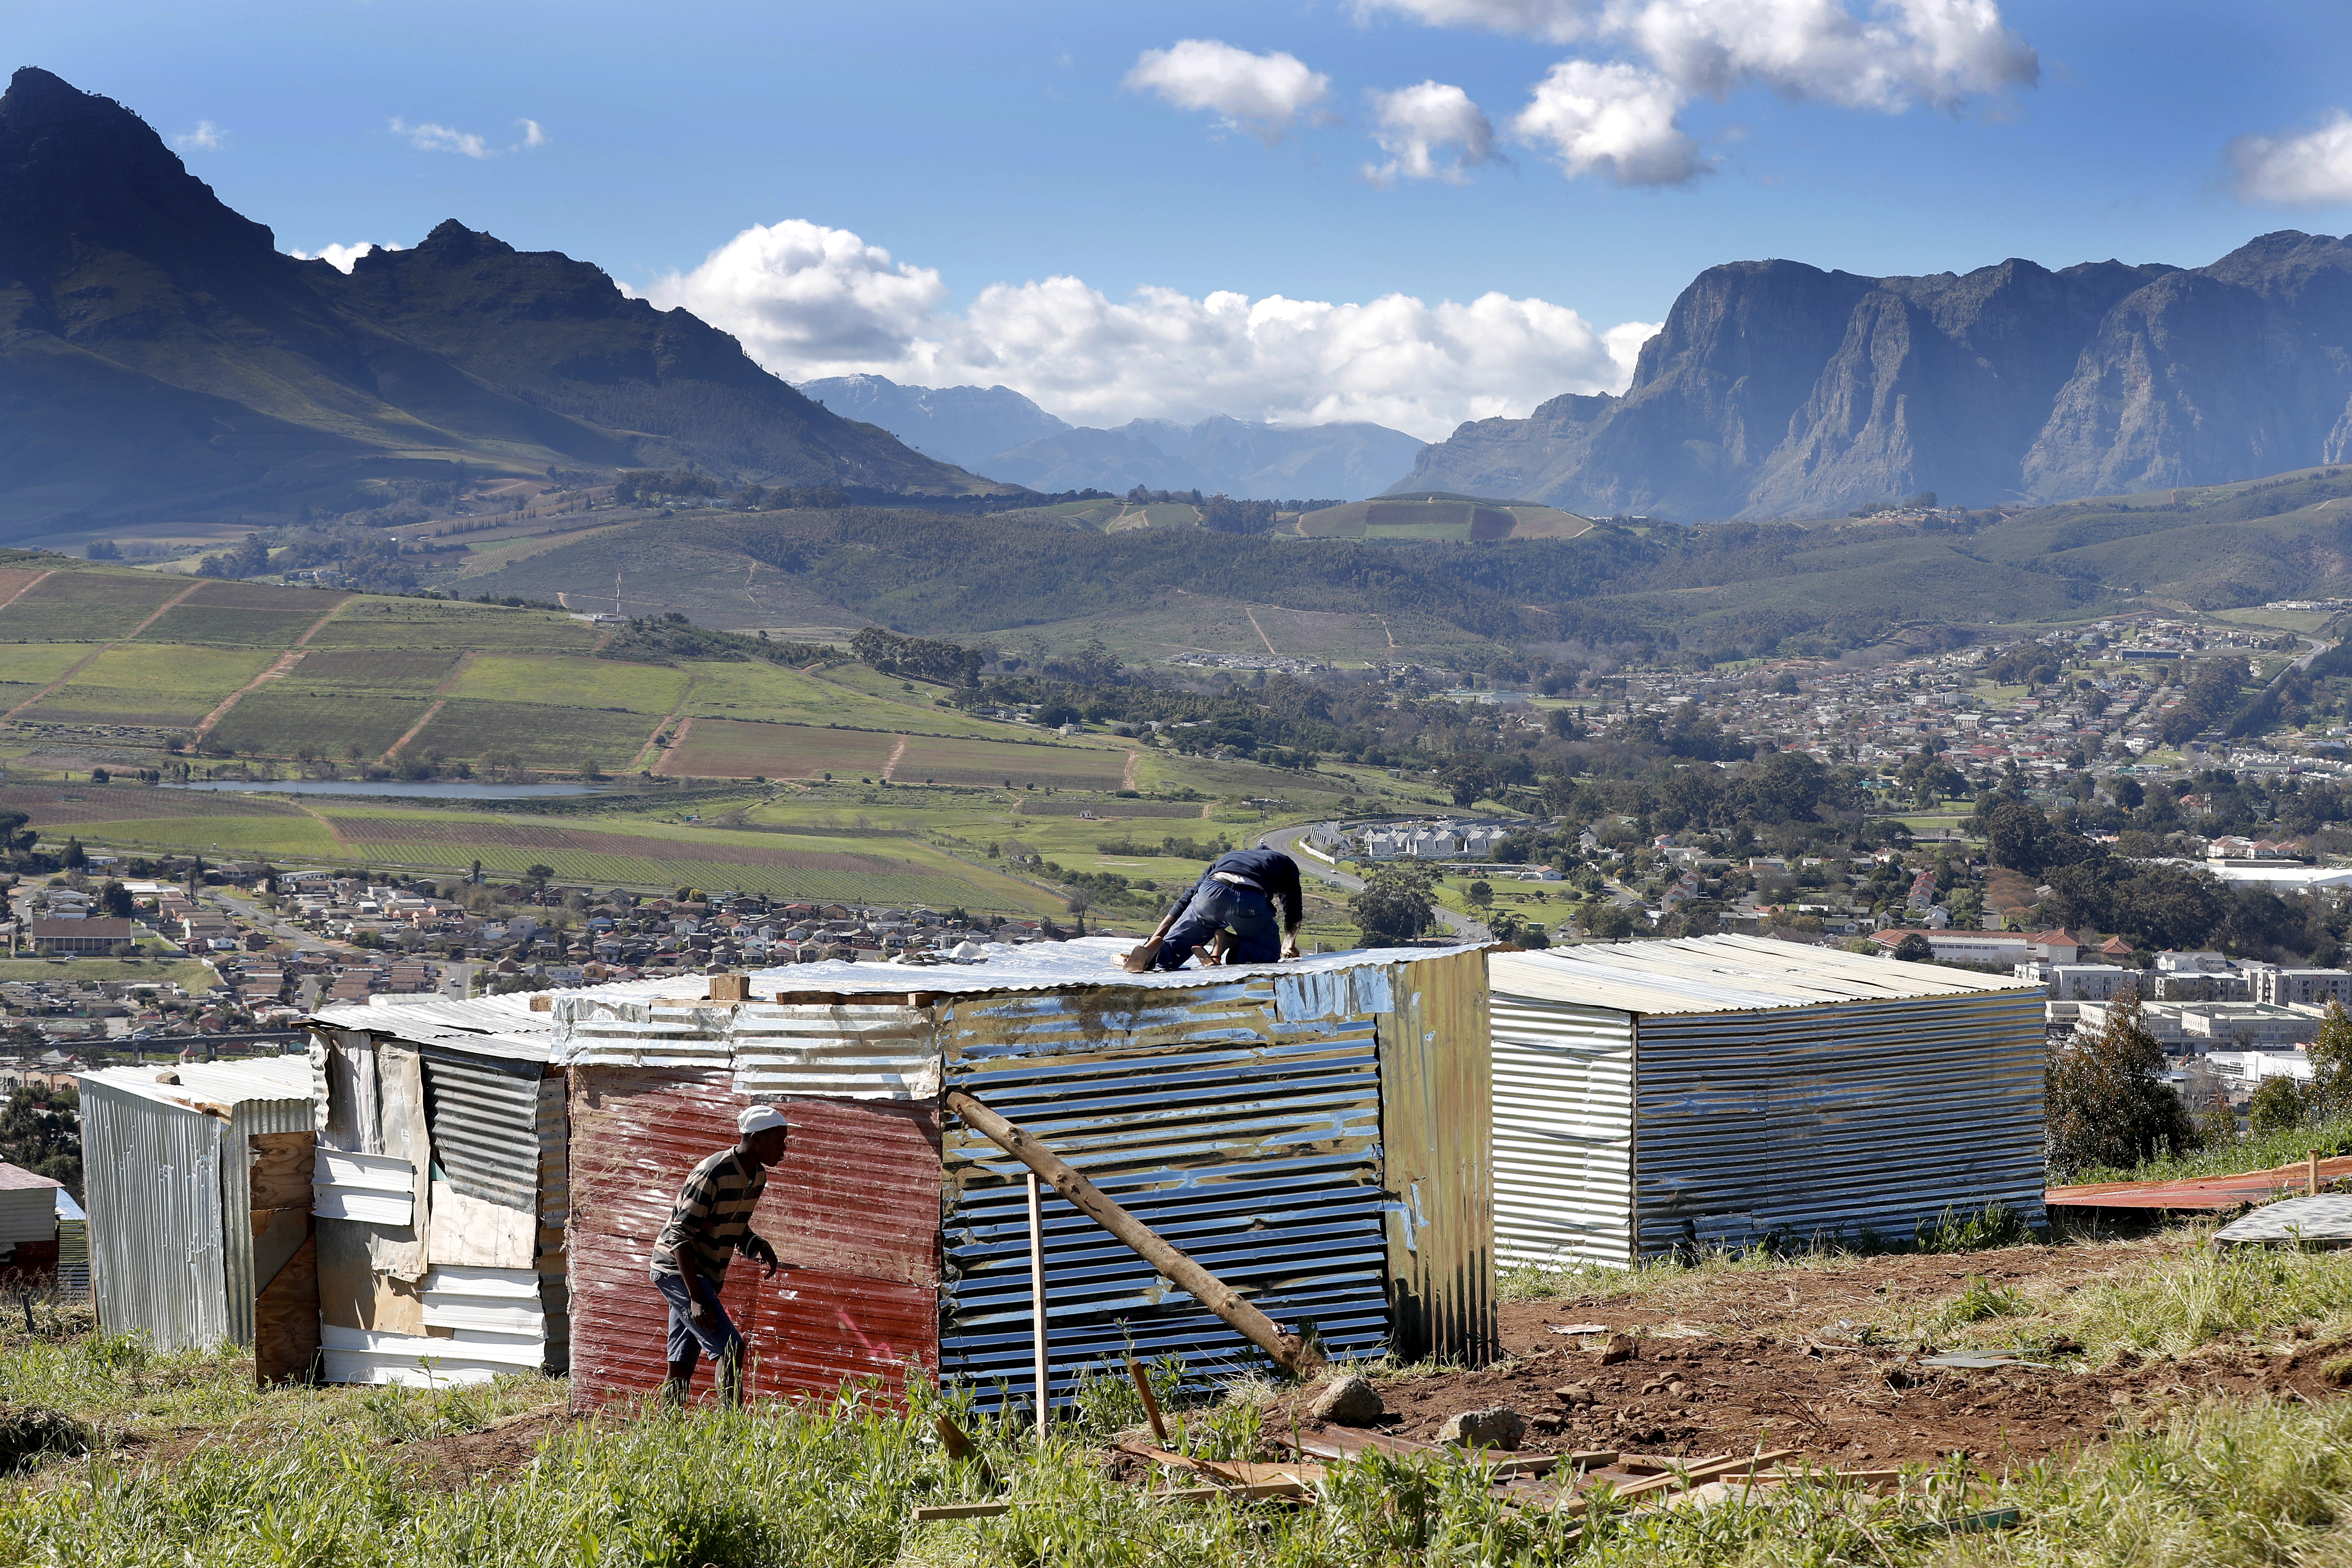 File photo showing South African men building an illegally erected shack during a land invasion on the property of Louiesenhof Wine farm in the heart of the major wine producing region of Stellenbosch, South Africa, Aug. 8, 2018. EPA-EFE/Nic Bothma
